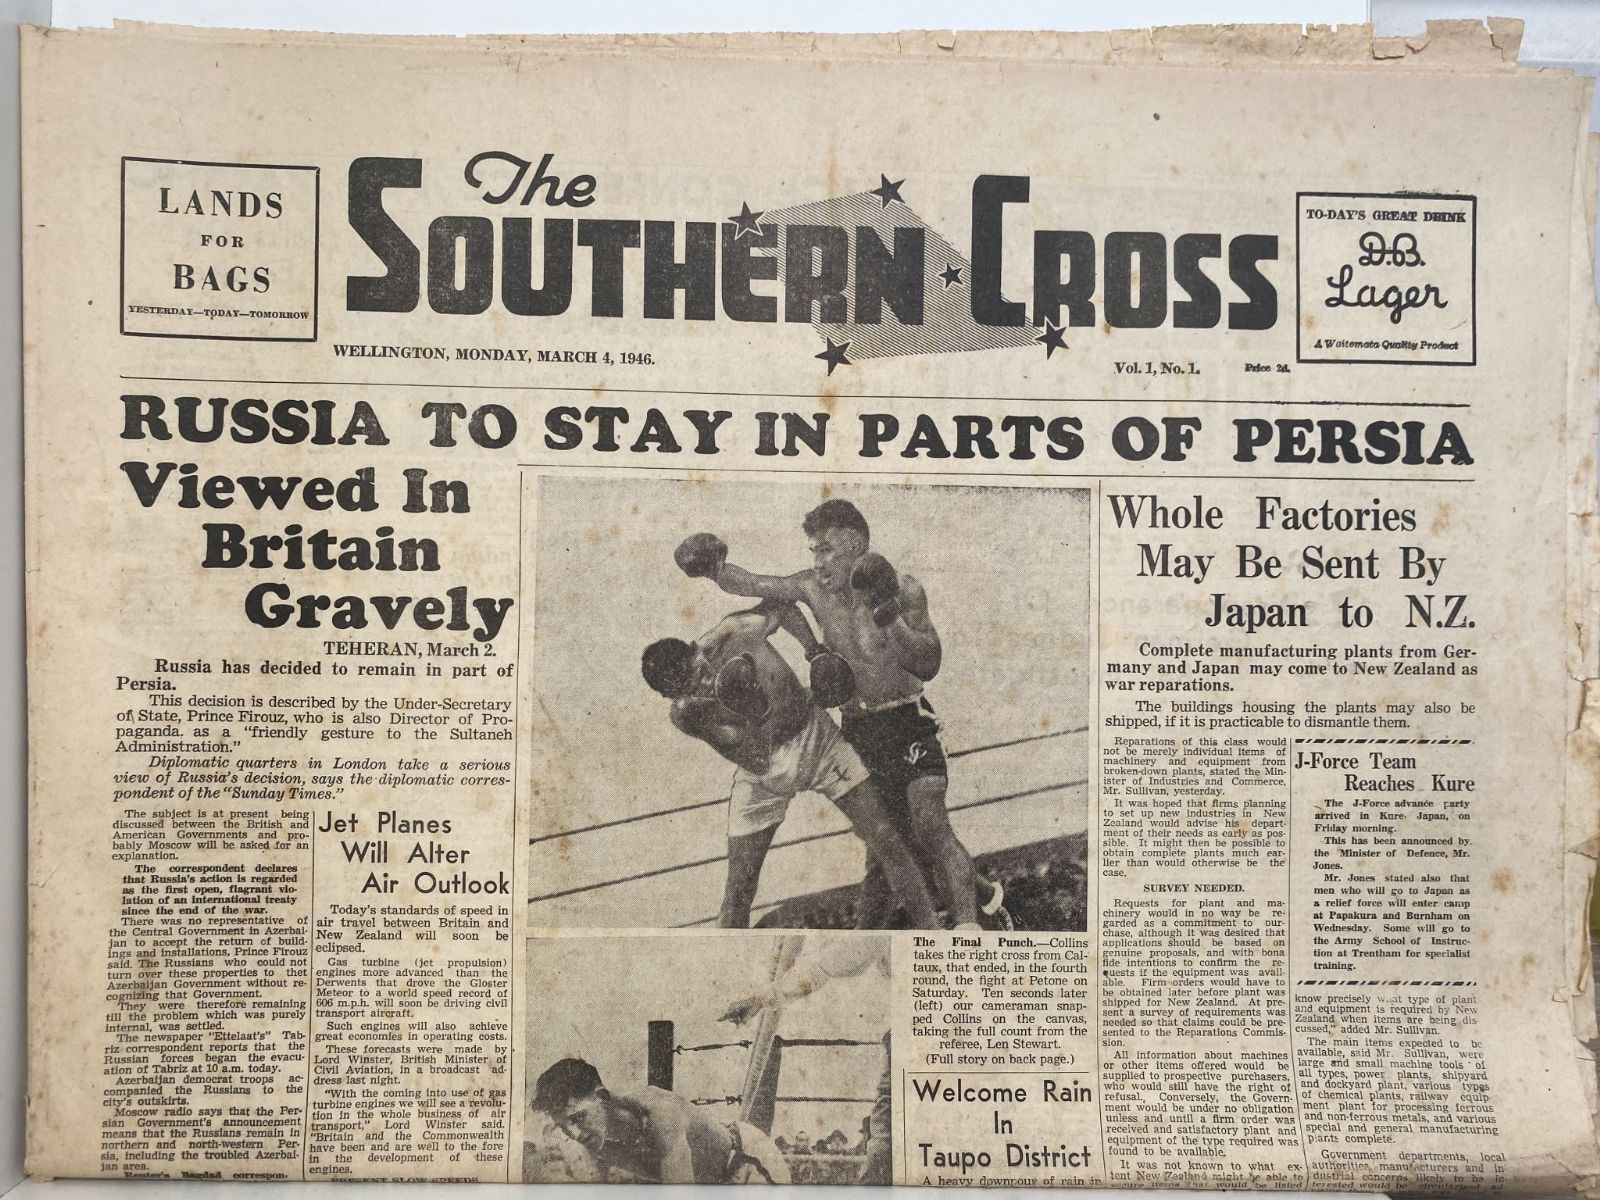 OLD NEWSPAPER: The Southern Cross, Wellington - Vol. 1, No. 1 - 4 March 1946